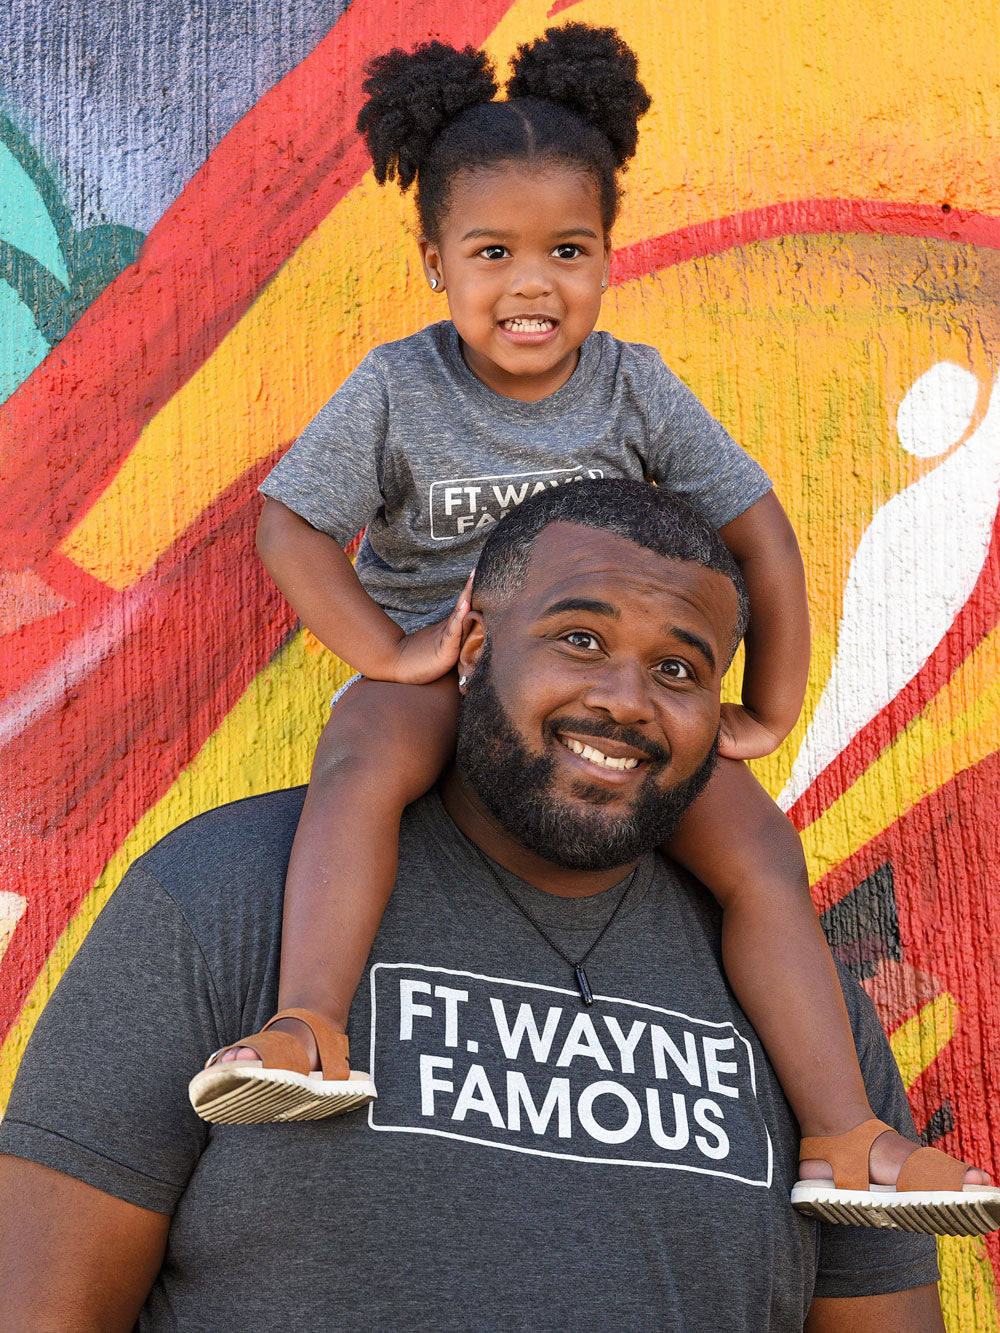 Fort Wayne Famous t-shirt on dad with daughter